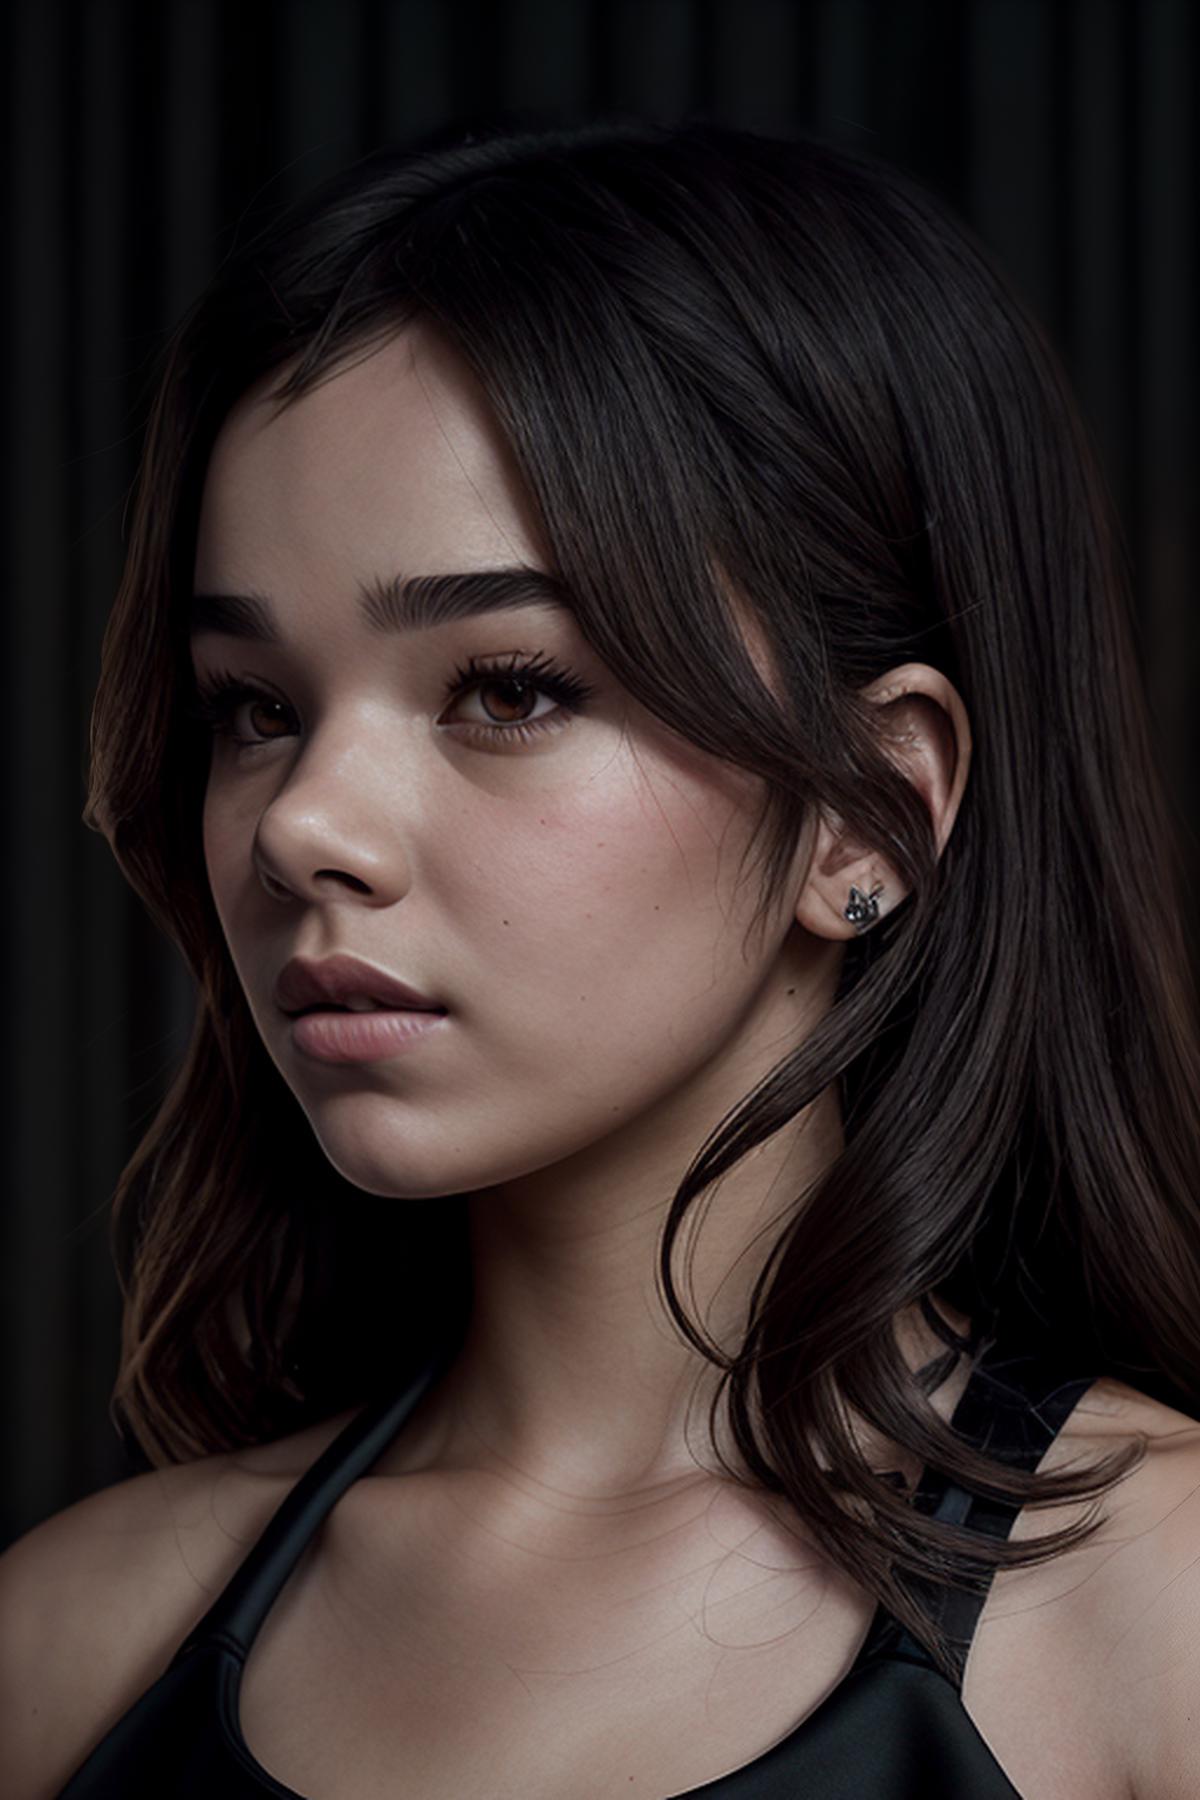 Hailee Steinfeld [SMF] image by AstralNemesis